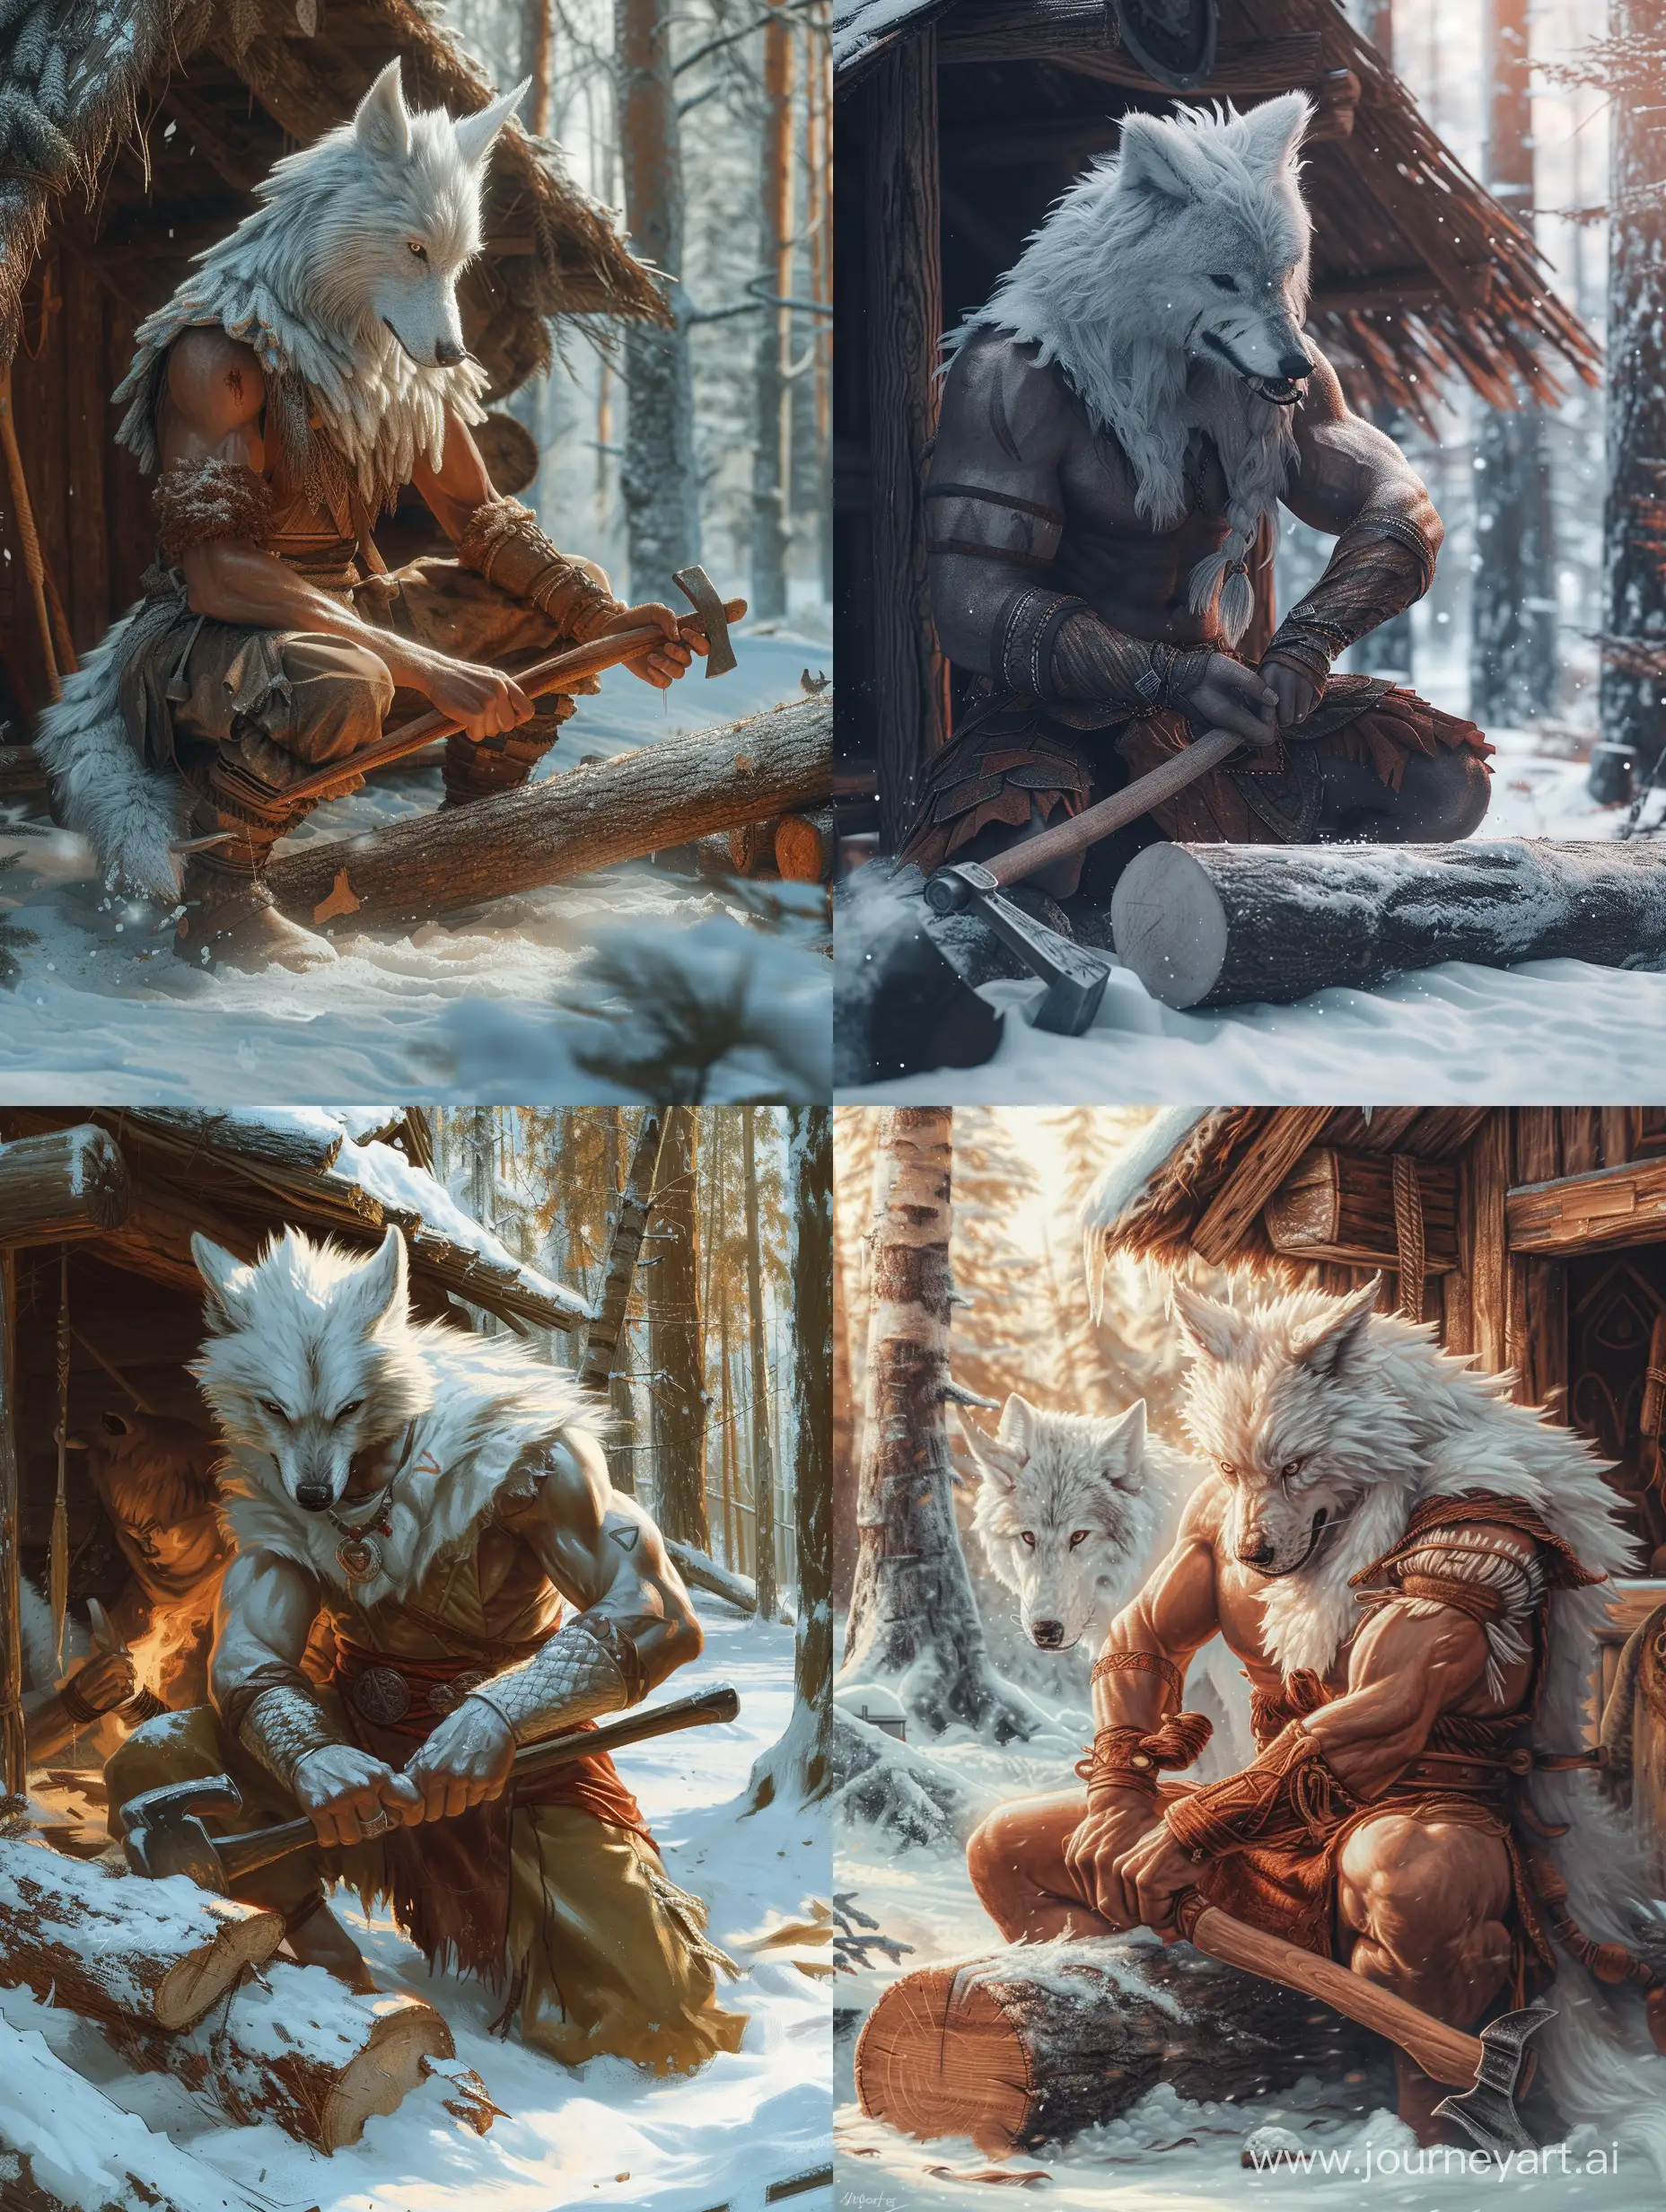 A warrior with wolf's head and human body,The leader of the wolves,white wolf,empty hands,in snowy forest,Next to the wooden hut, he is chopping a log with an ax,Detailed clothing.incredible detail,warm light.